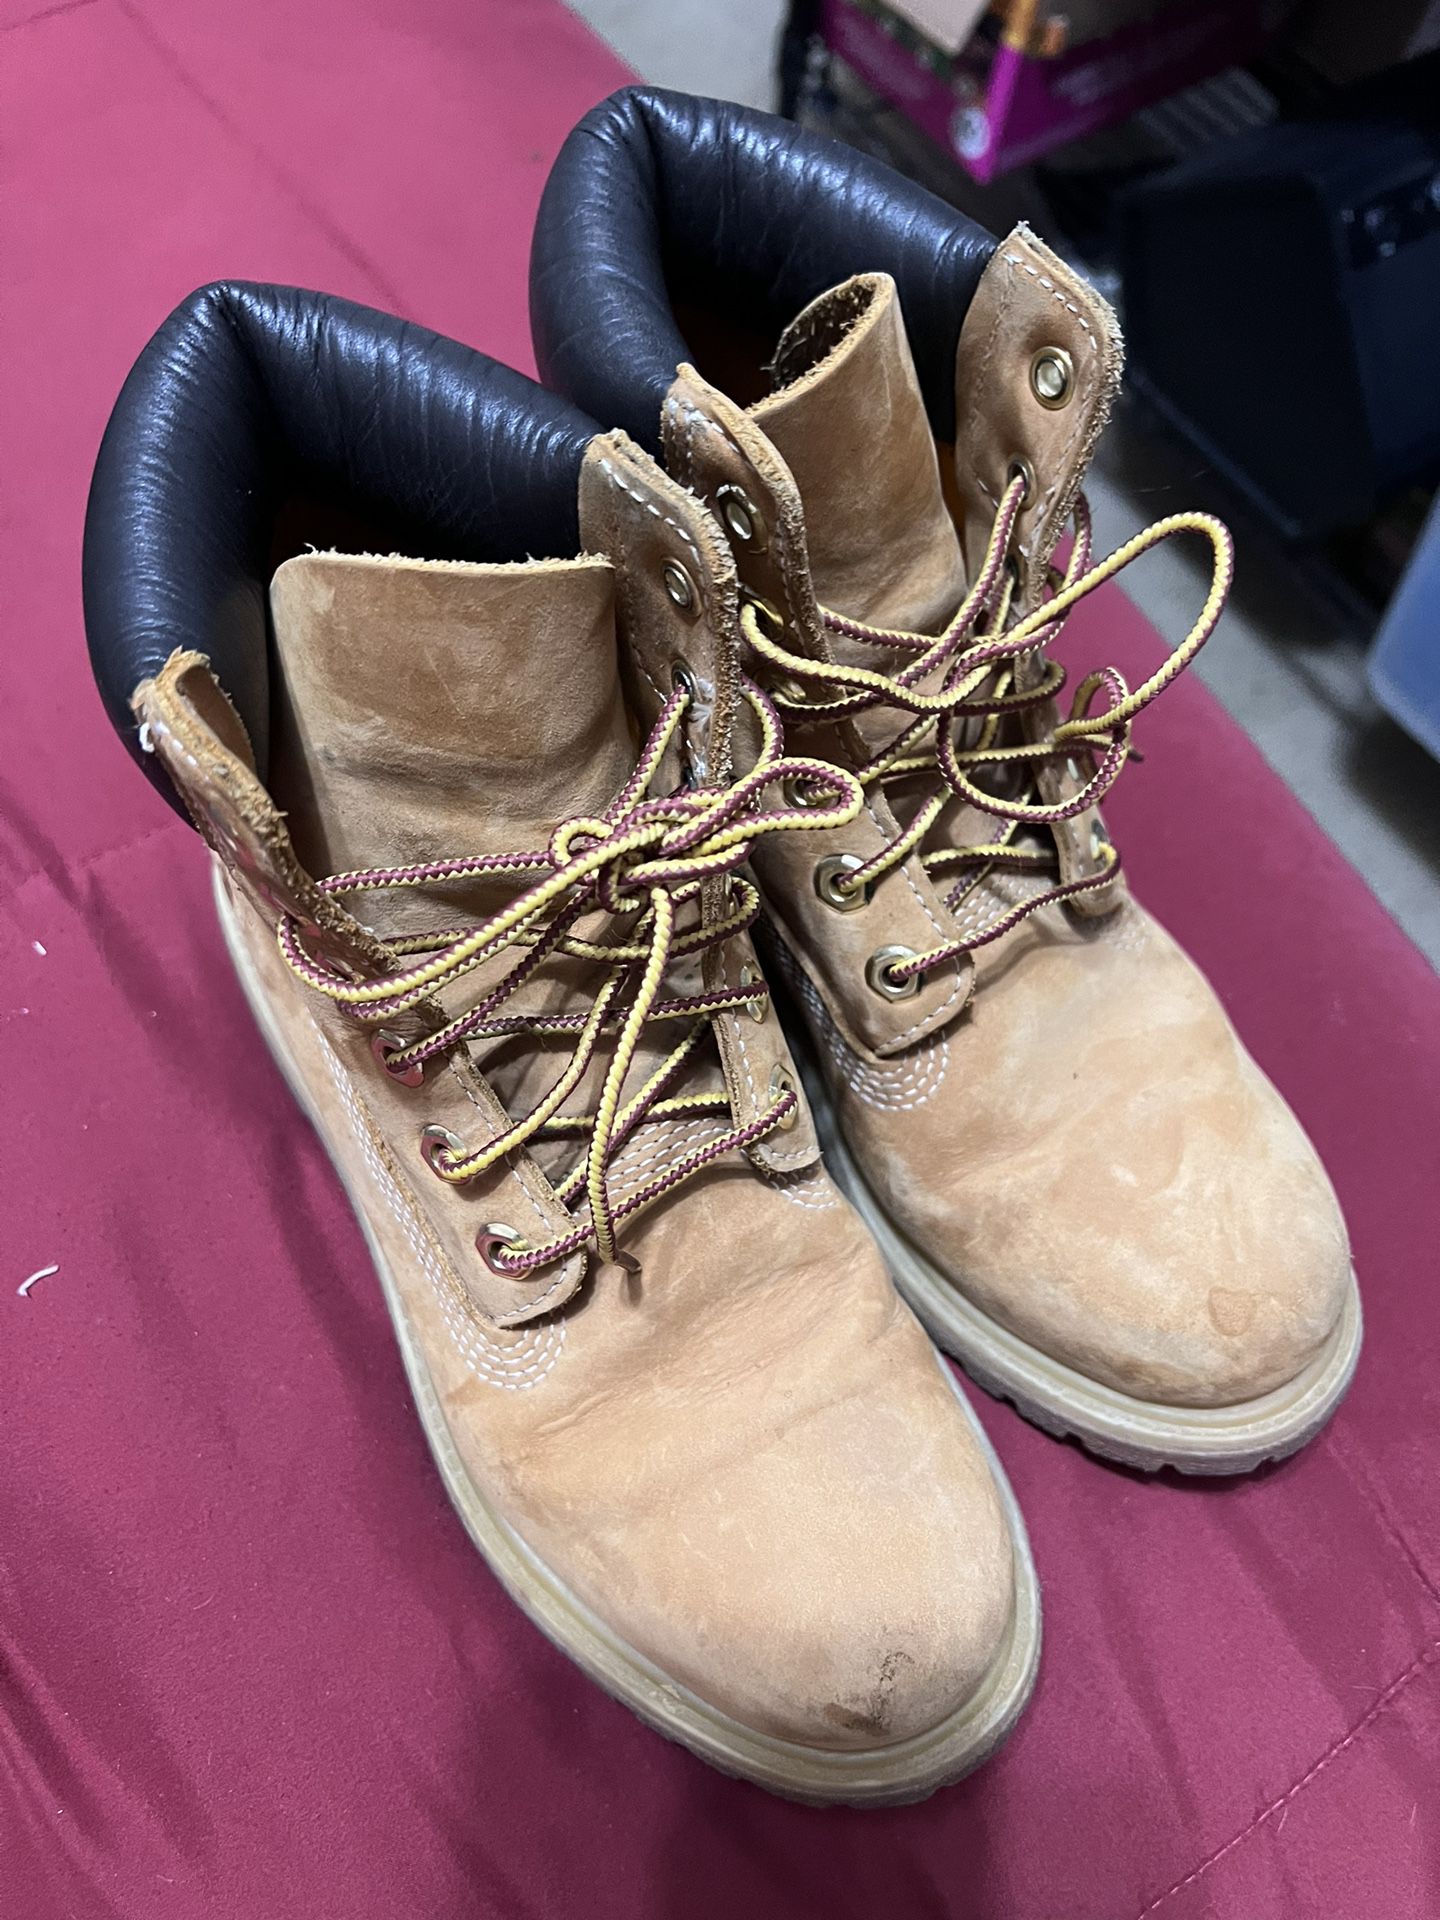 Timberlands Woman’s 7M Boots